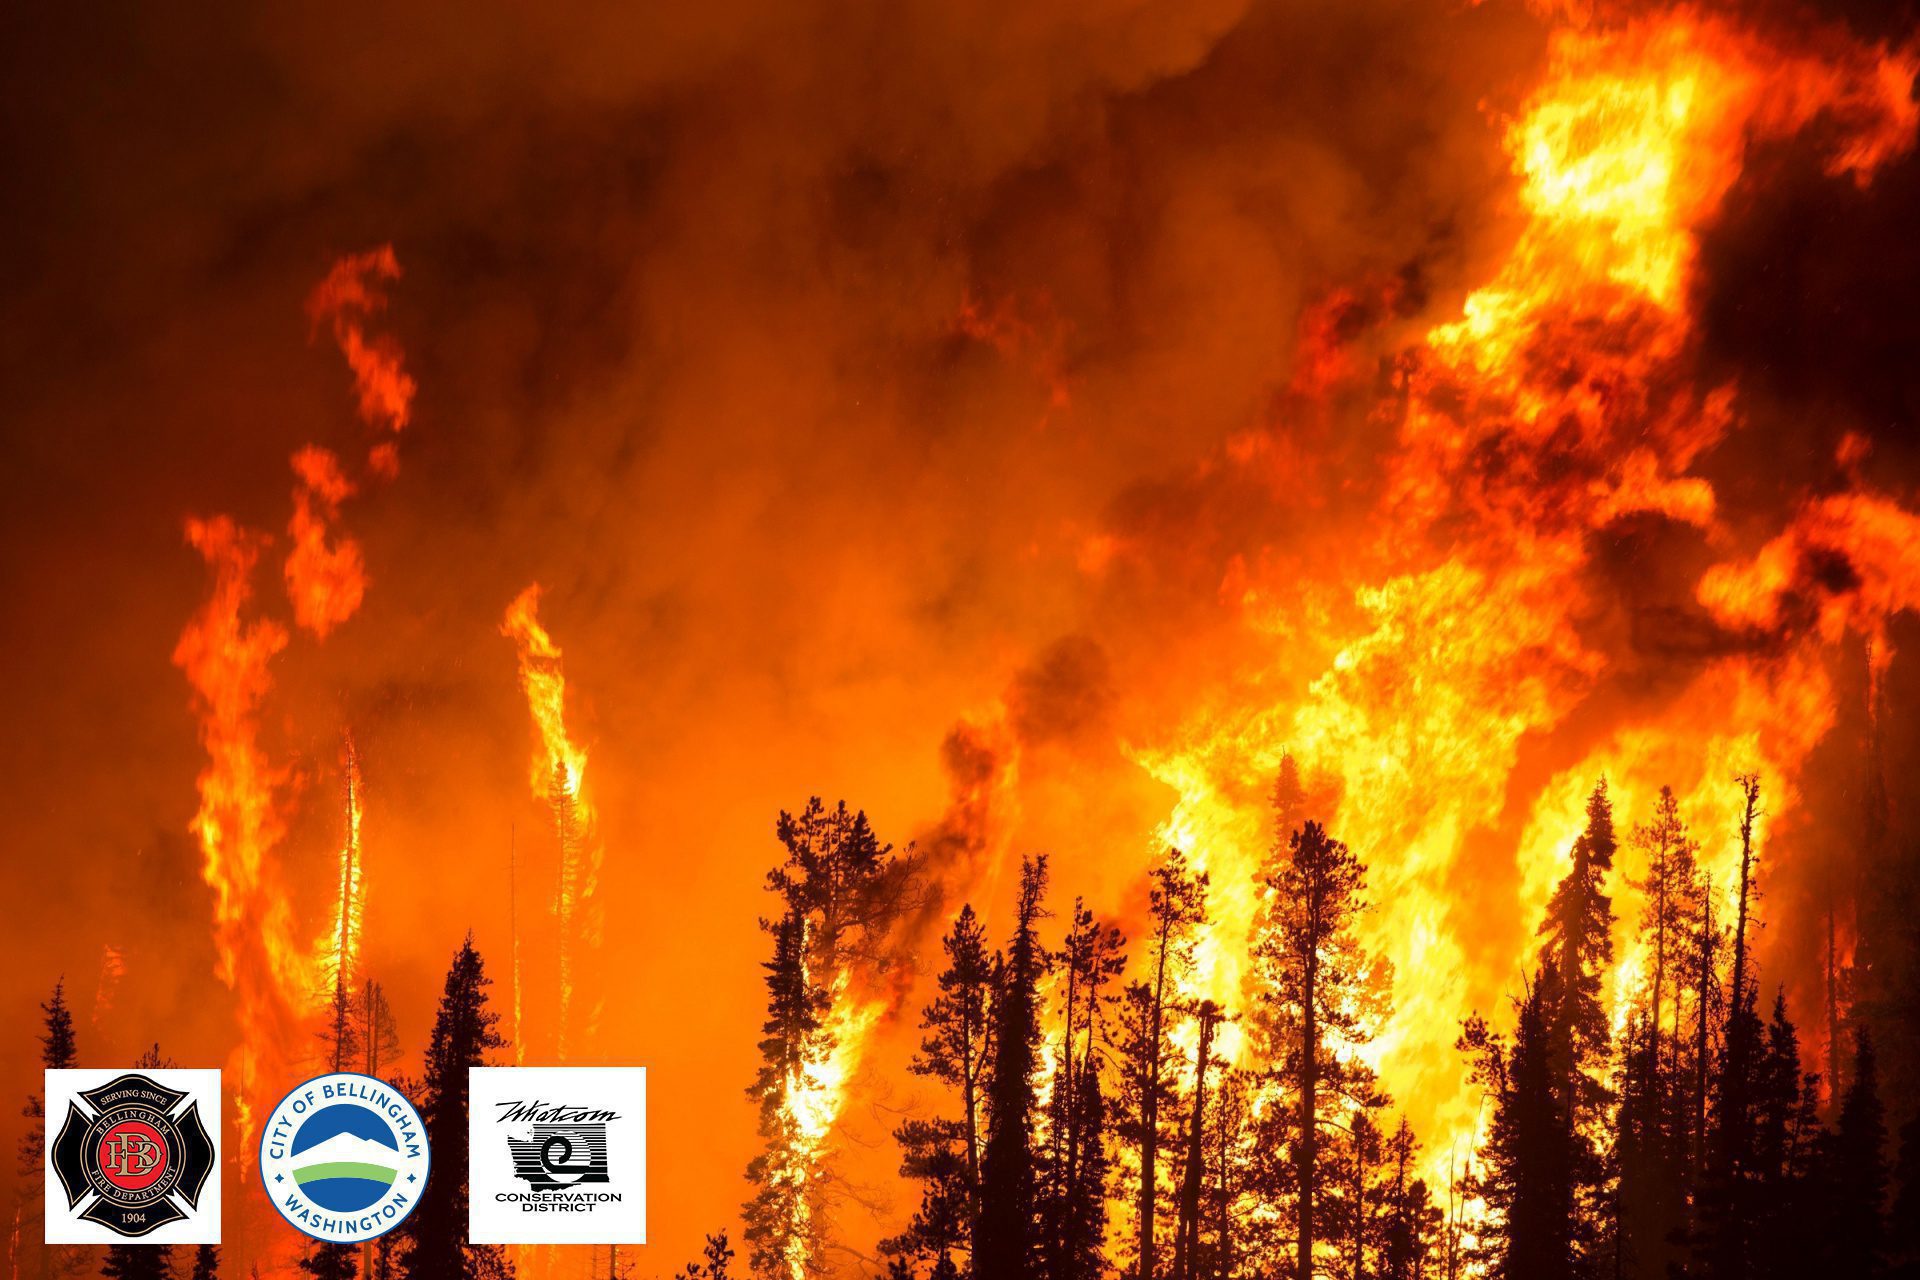 Image showing a forest fire and smoky sky with the Bellingham Fire Department, City of Bellingham, and Whatcom Conservation District logos in the bottom left corner